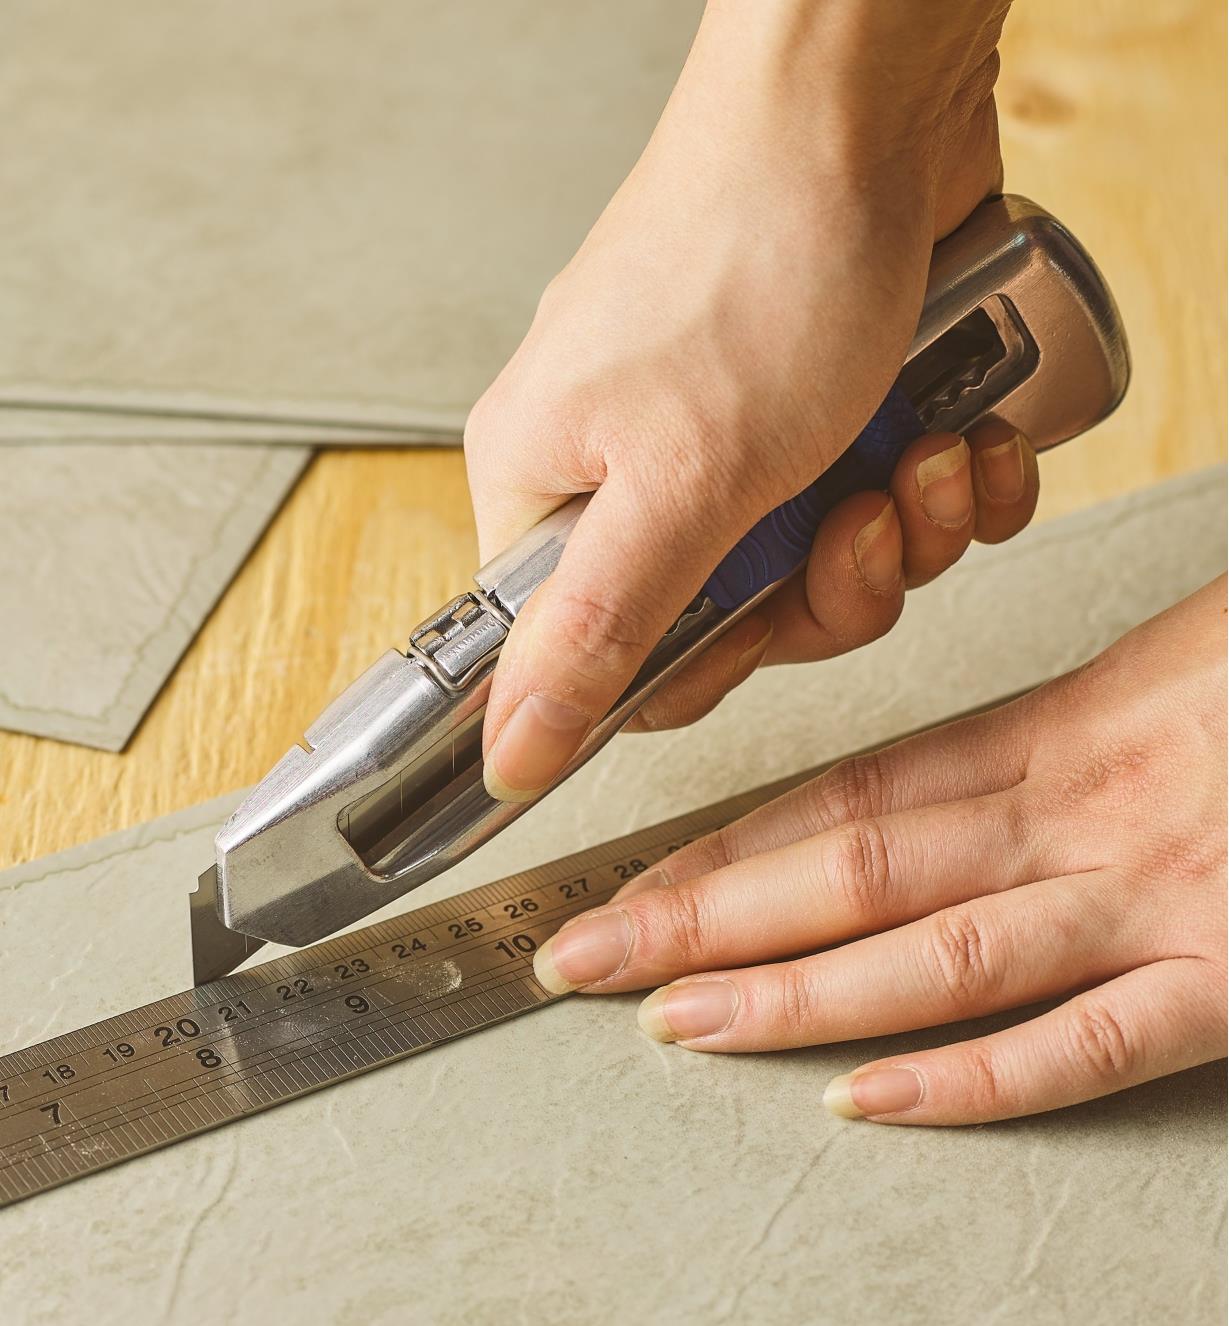 The Delphin snap-off blade knife being used to cut linoleum flooring